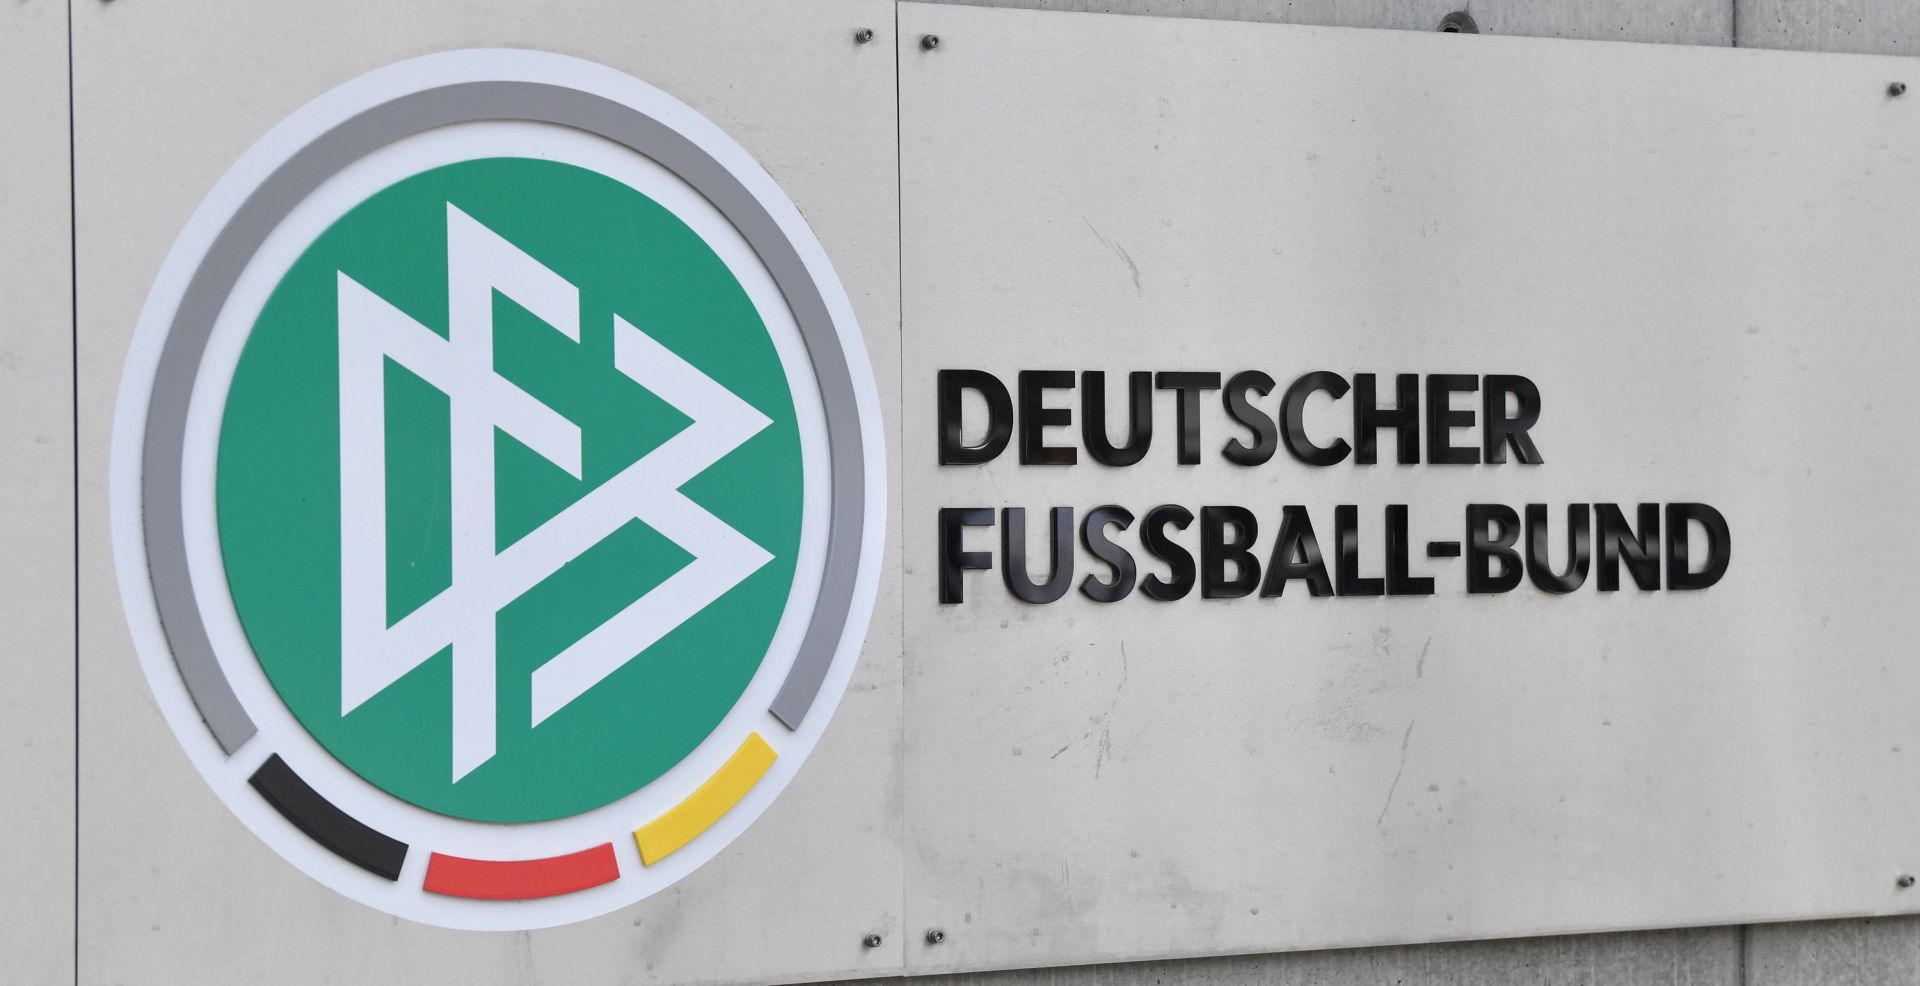 FILED - 03 November 2015, Hessen, Frankfurt/Main: The German Football Federation (DFB) logo can be seen at the headquarter. The DFB headquartersand the homes of DFB officials have been searched on suspicion of tax evasion, Frankfurt prosecutors say. Photo: picture alliance / Boris Roessler/dpa